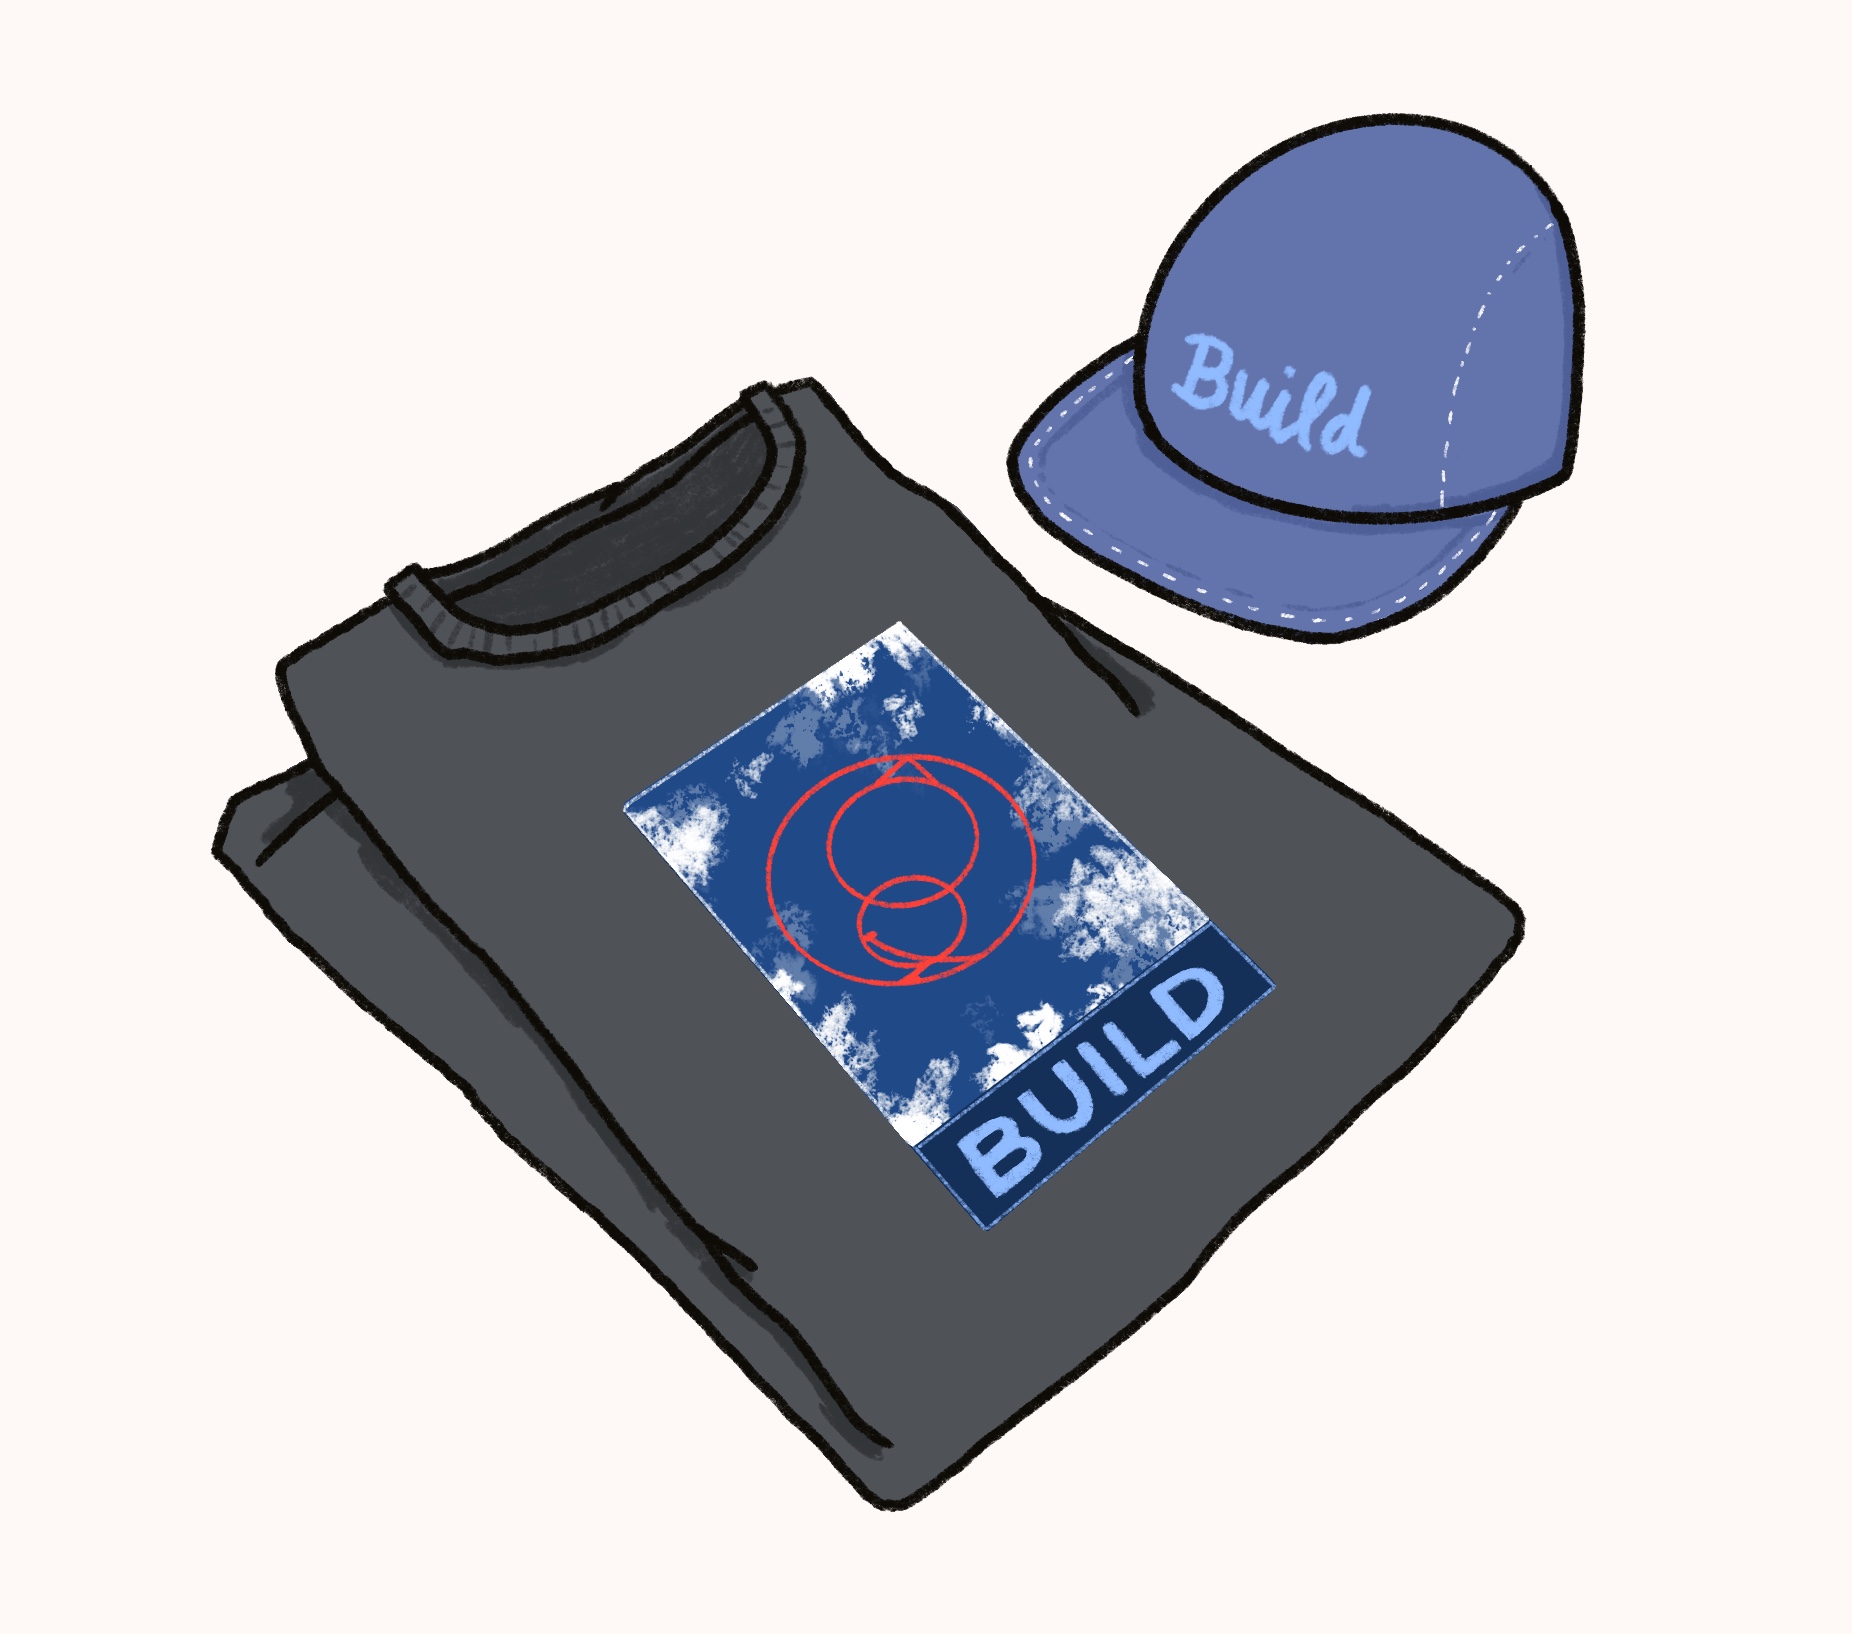 Illustration of a "Build" hat and t-shirt